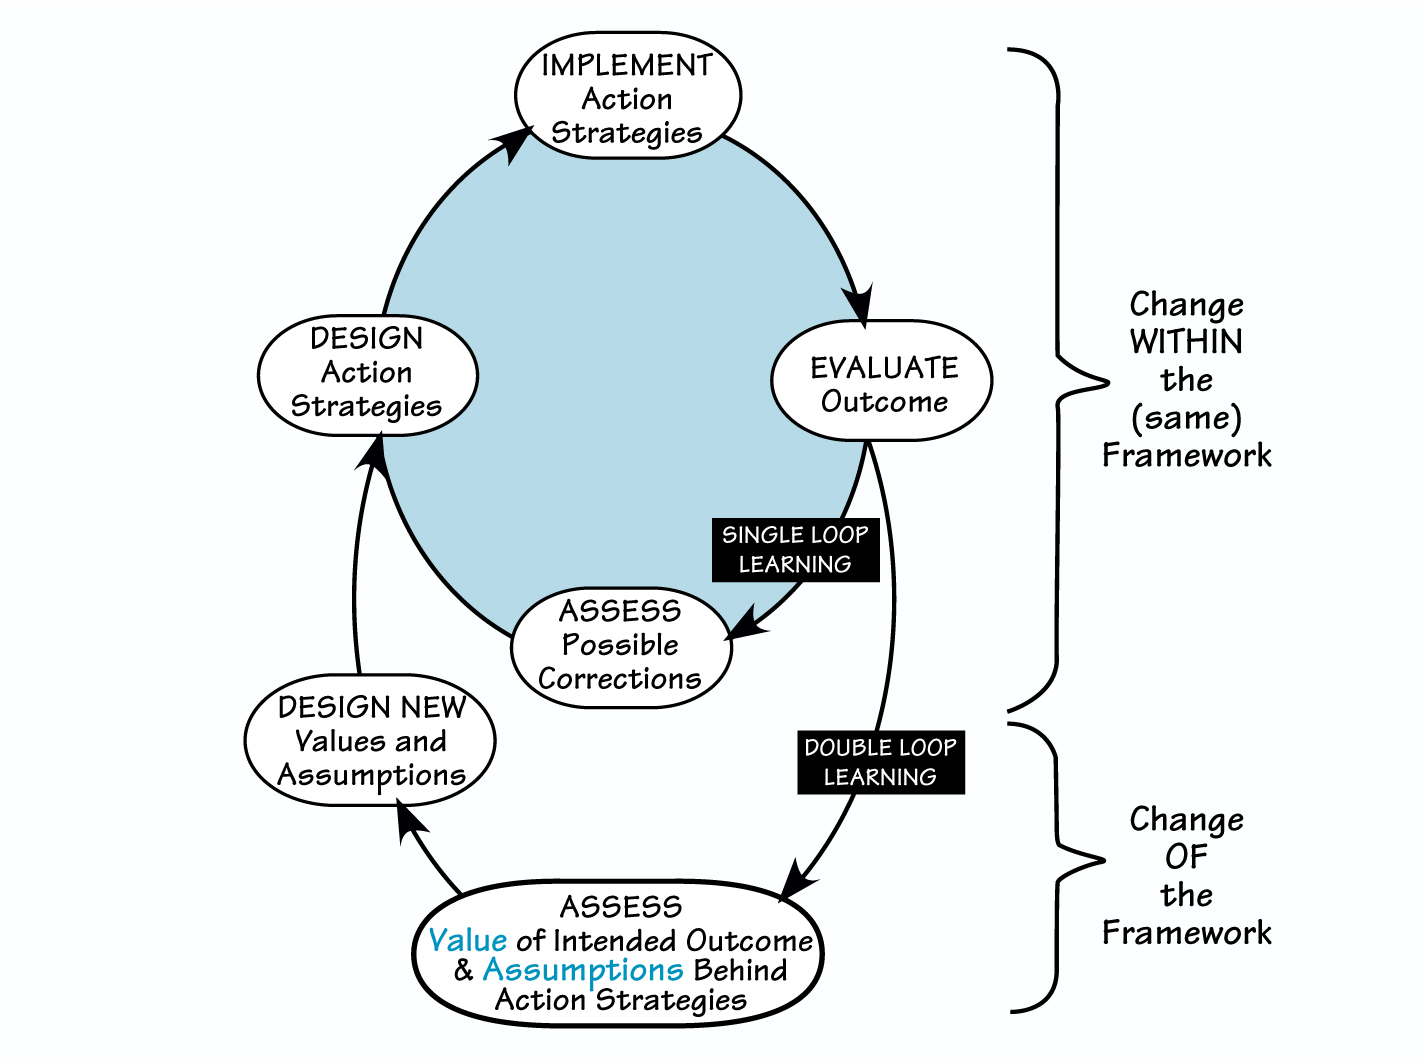 DOUBLE-LOOP LEARNING CYCLE